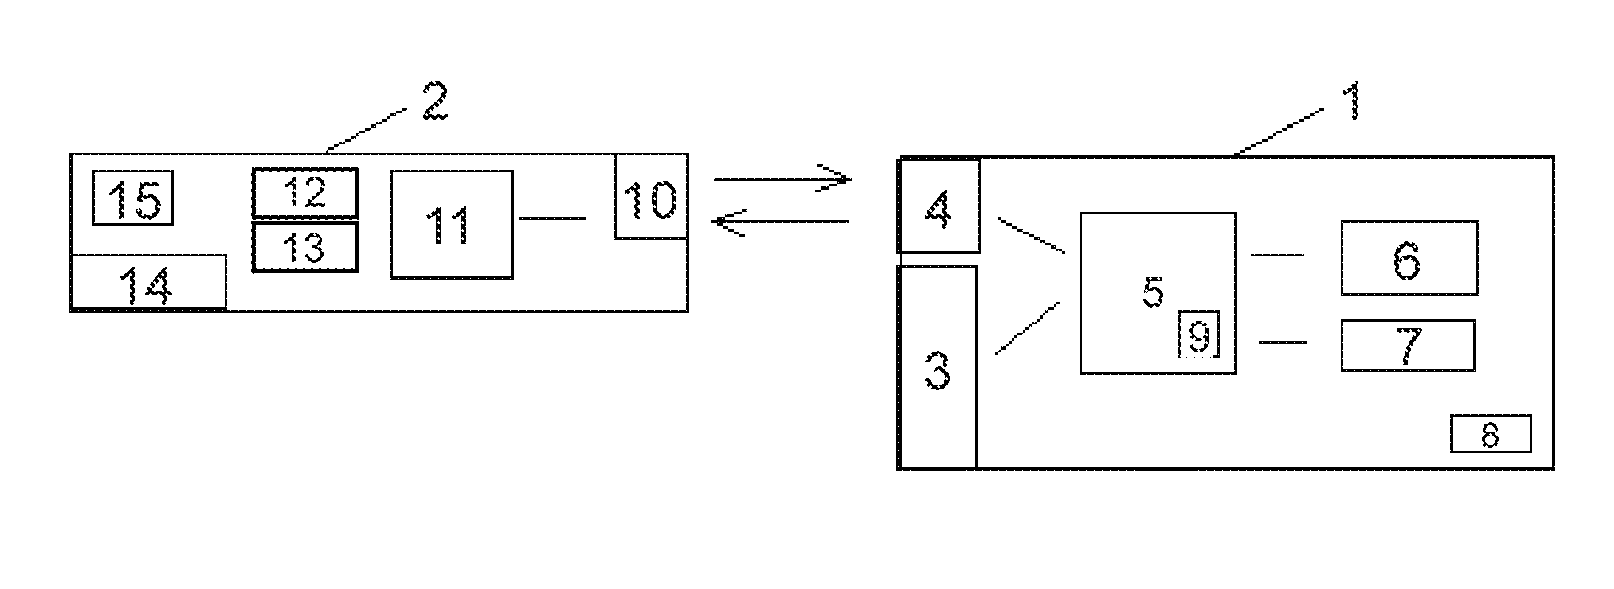 Locking system with infrared communications